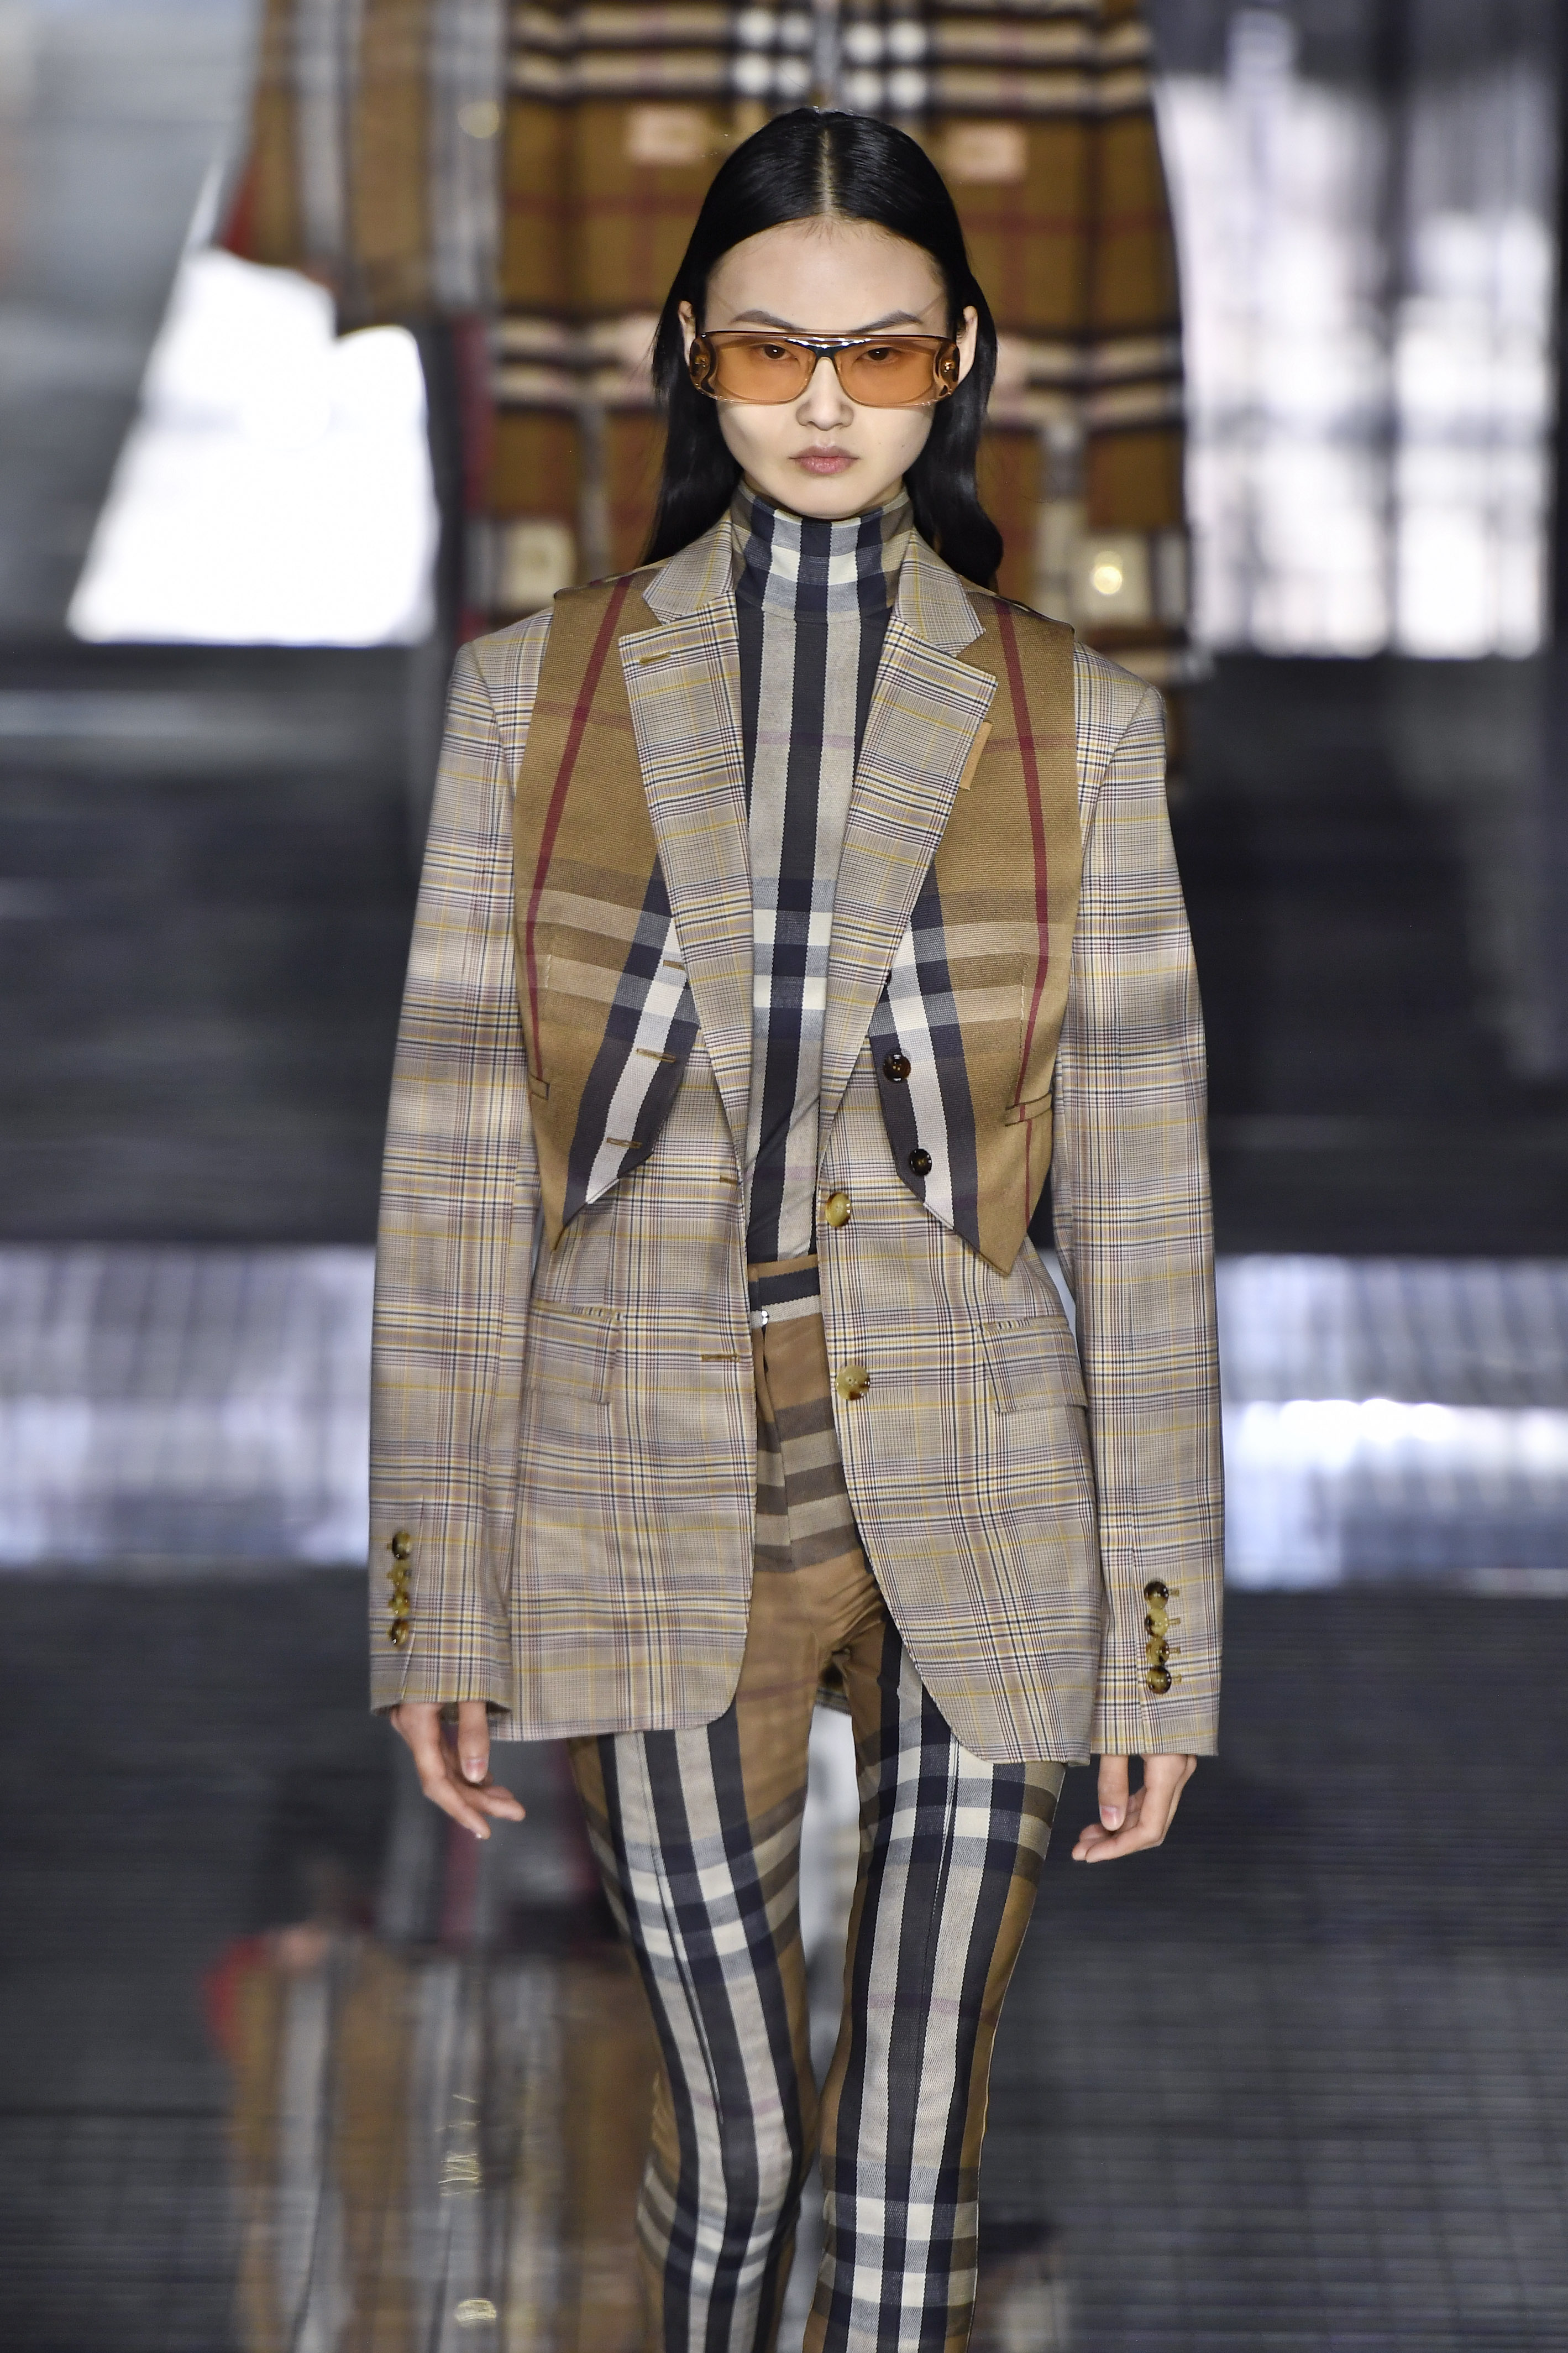 Burberry to Run September Fashion Show Outdoors Without Guests